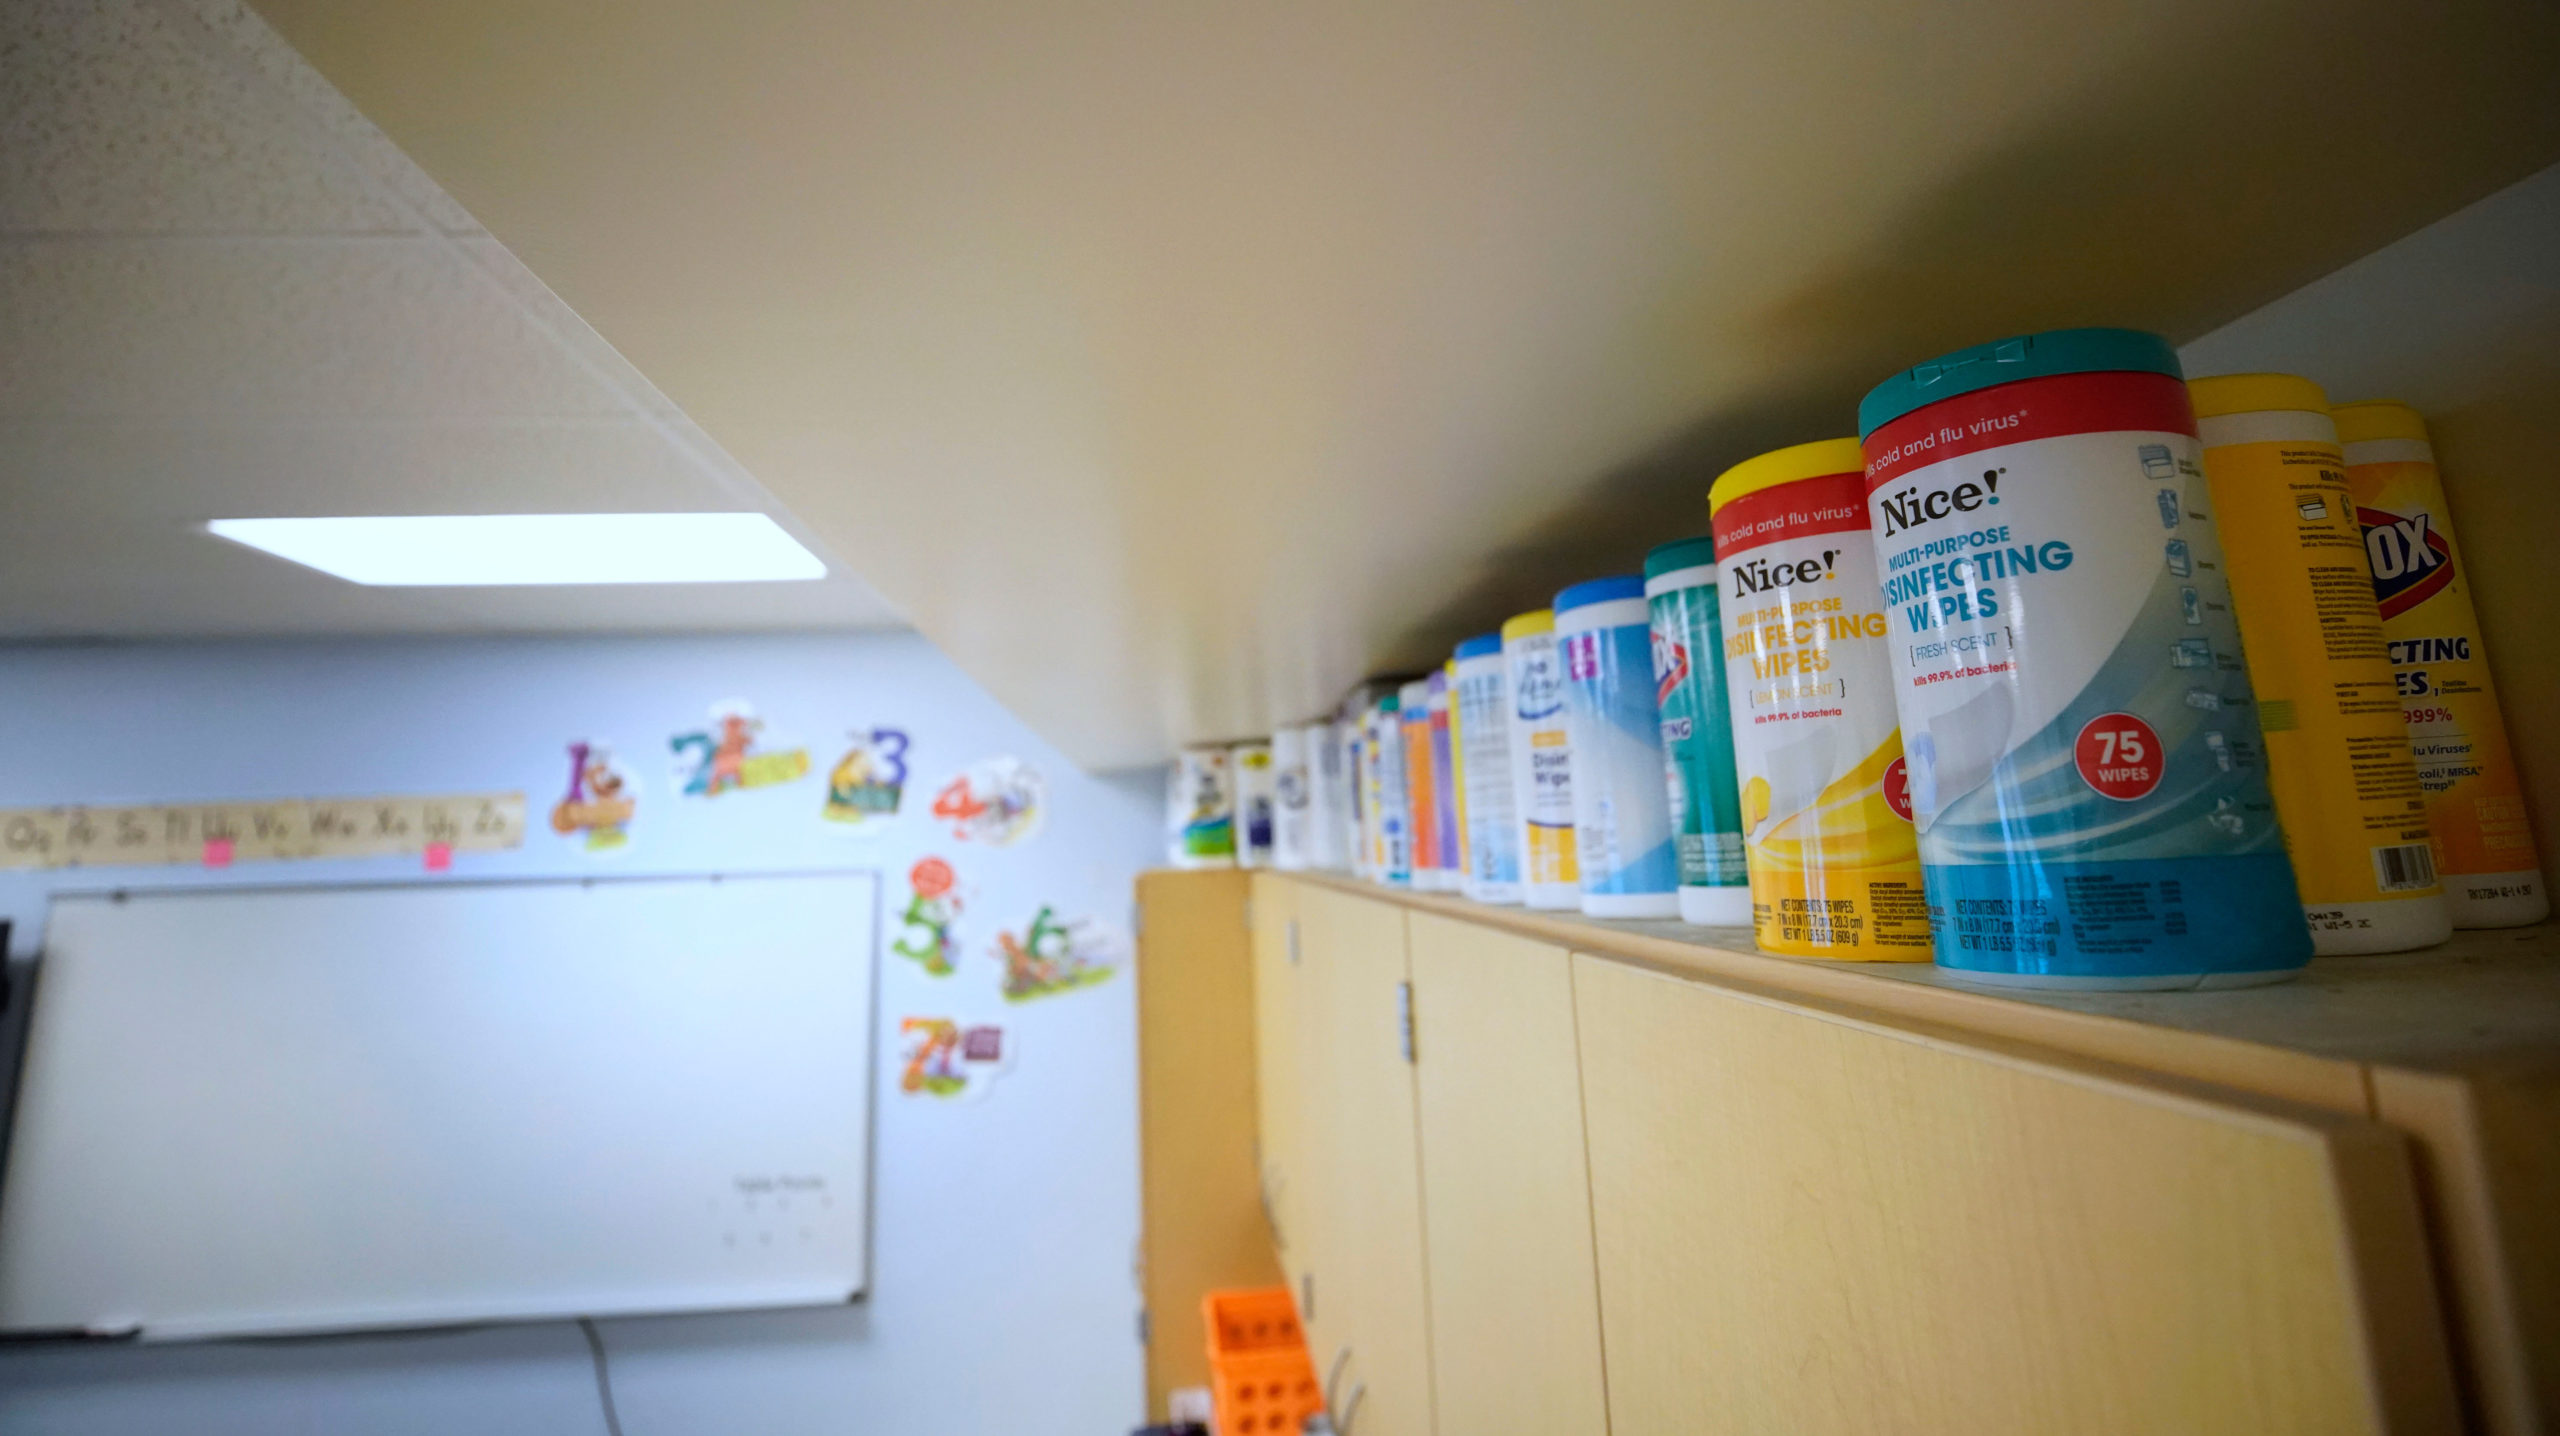 Sanitary wipes and cleaning supplies sit on a shelf in a classroom waiting to be used next year at Freedom Preparatory Academy on May 18, 2020, in Provo, Utah. (Photo: George Frey, Getty Images)